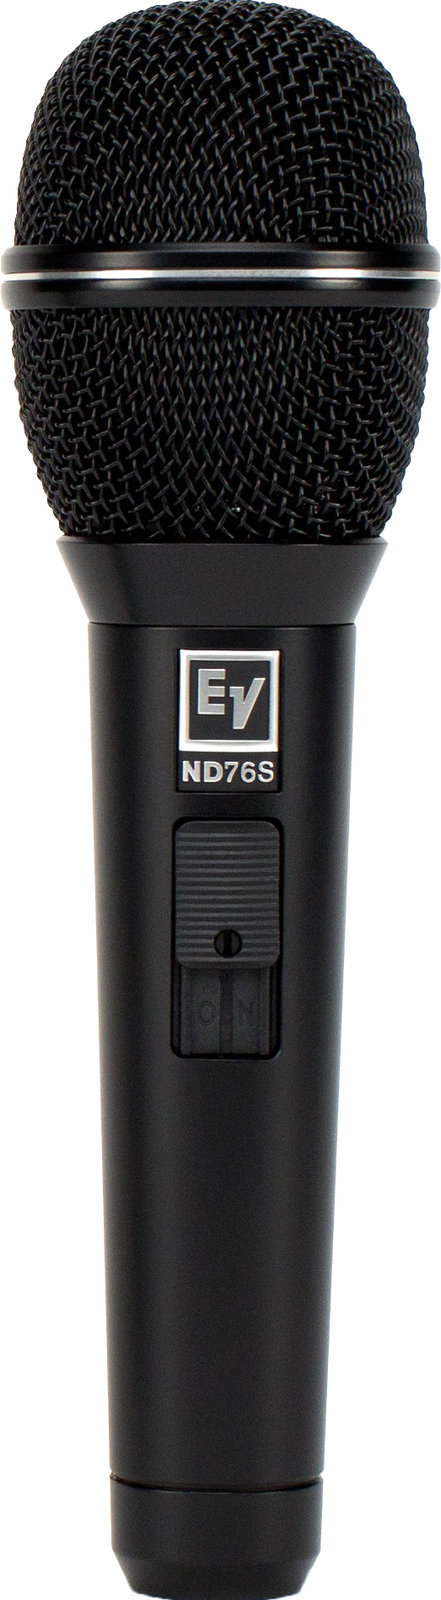 Vocal Dynamic Microphone Electro Voice ND76S Vocal Dynamic Microphone